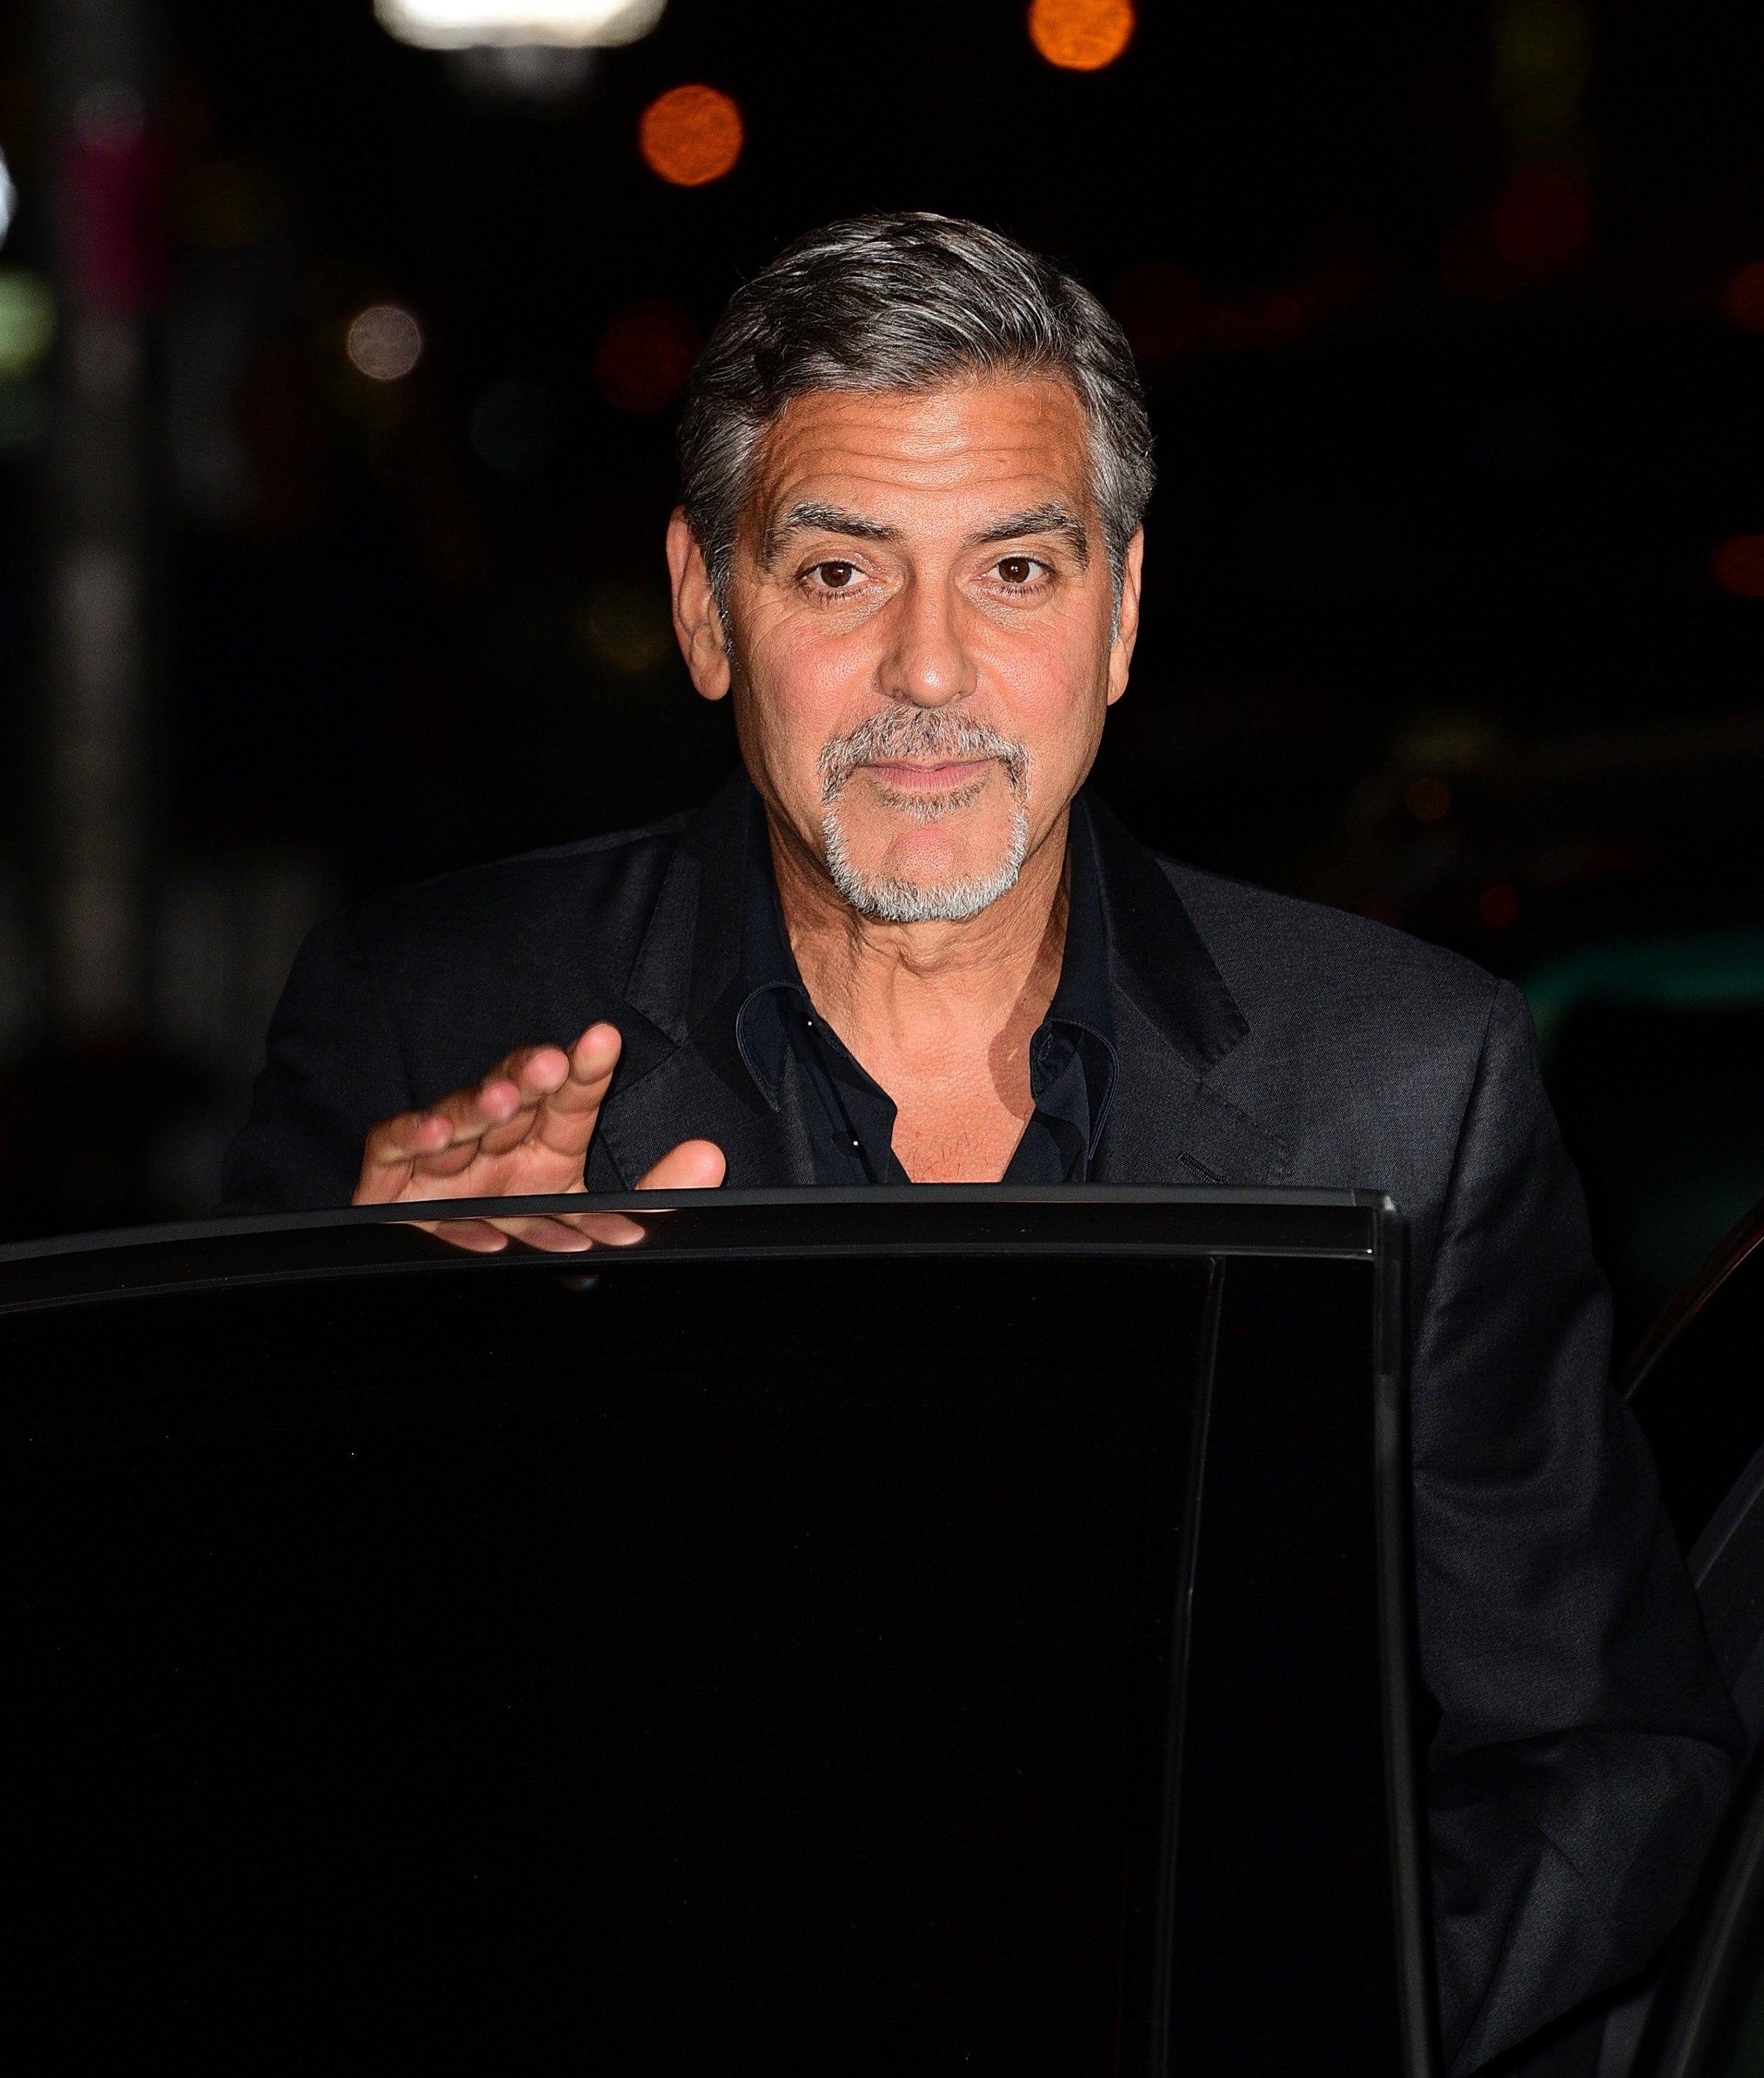 George Clooney leaves the first taping of "The Late Show With Stephen Colbert" at Ed Sullivan Theater on September 8, 2015 in New York City.